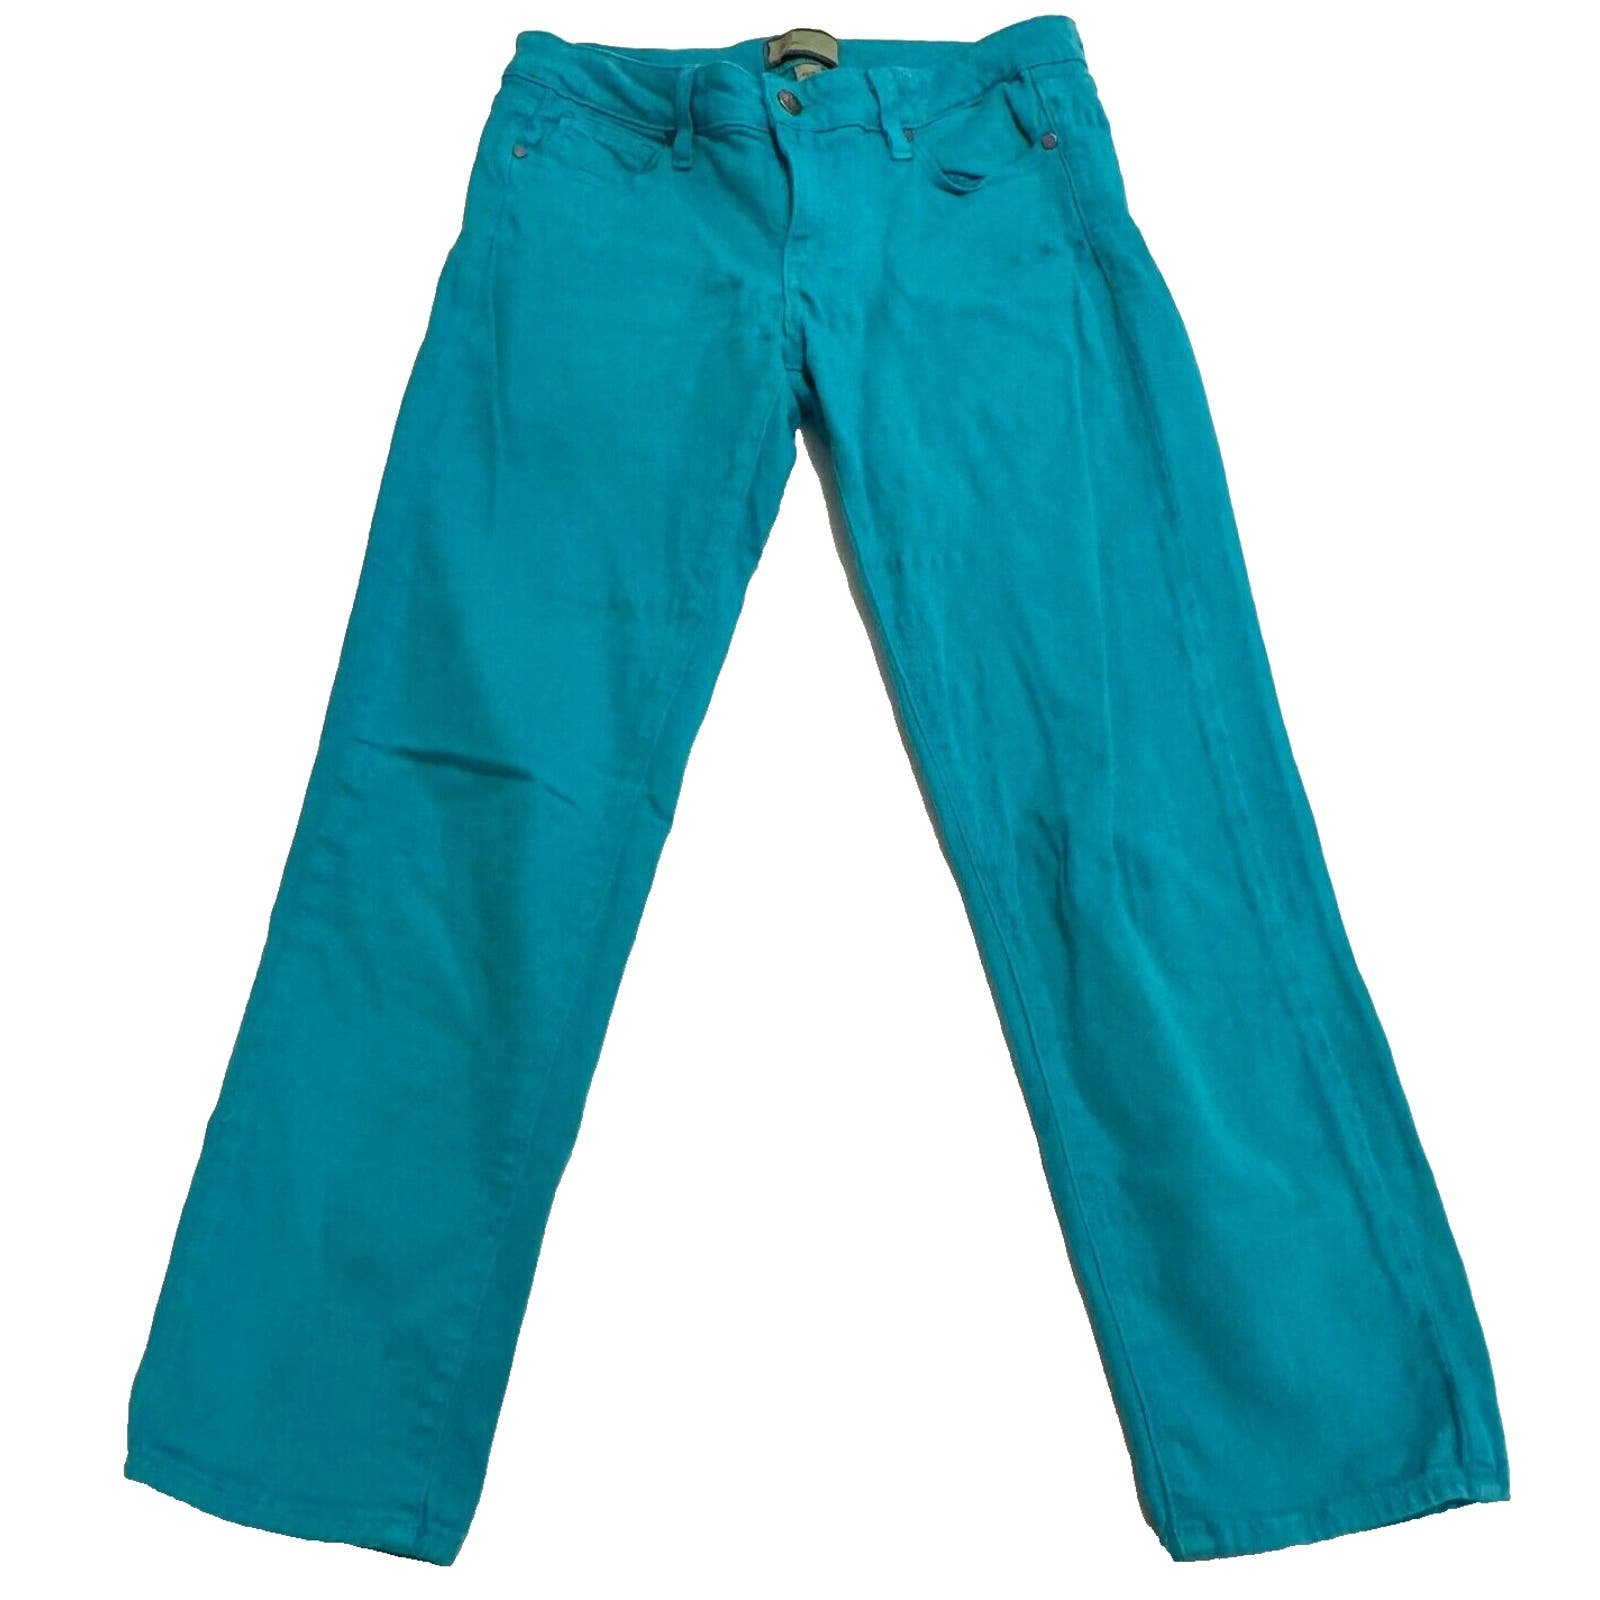 save up to 70% Paige Jeans Women´s 27 Roxie Capri Stretch Denim *Upside down label* Turquoise IvwF7MH8E Great